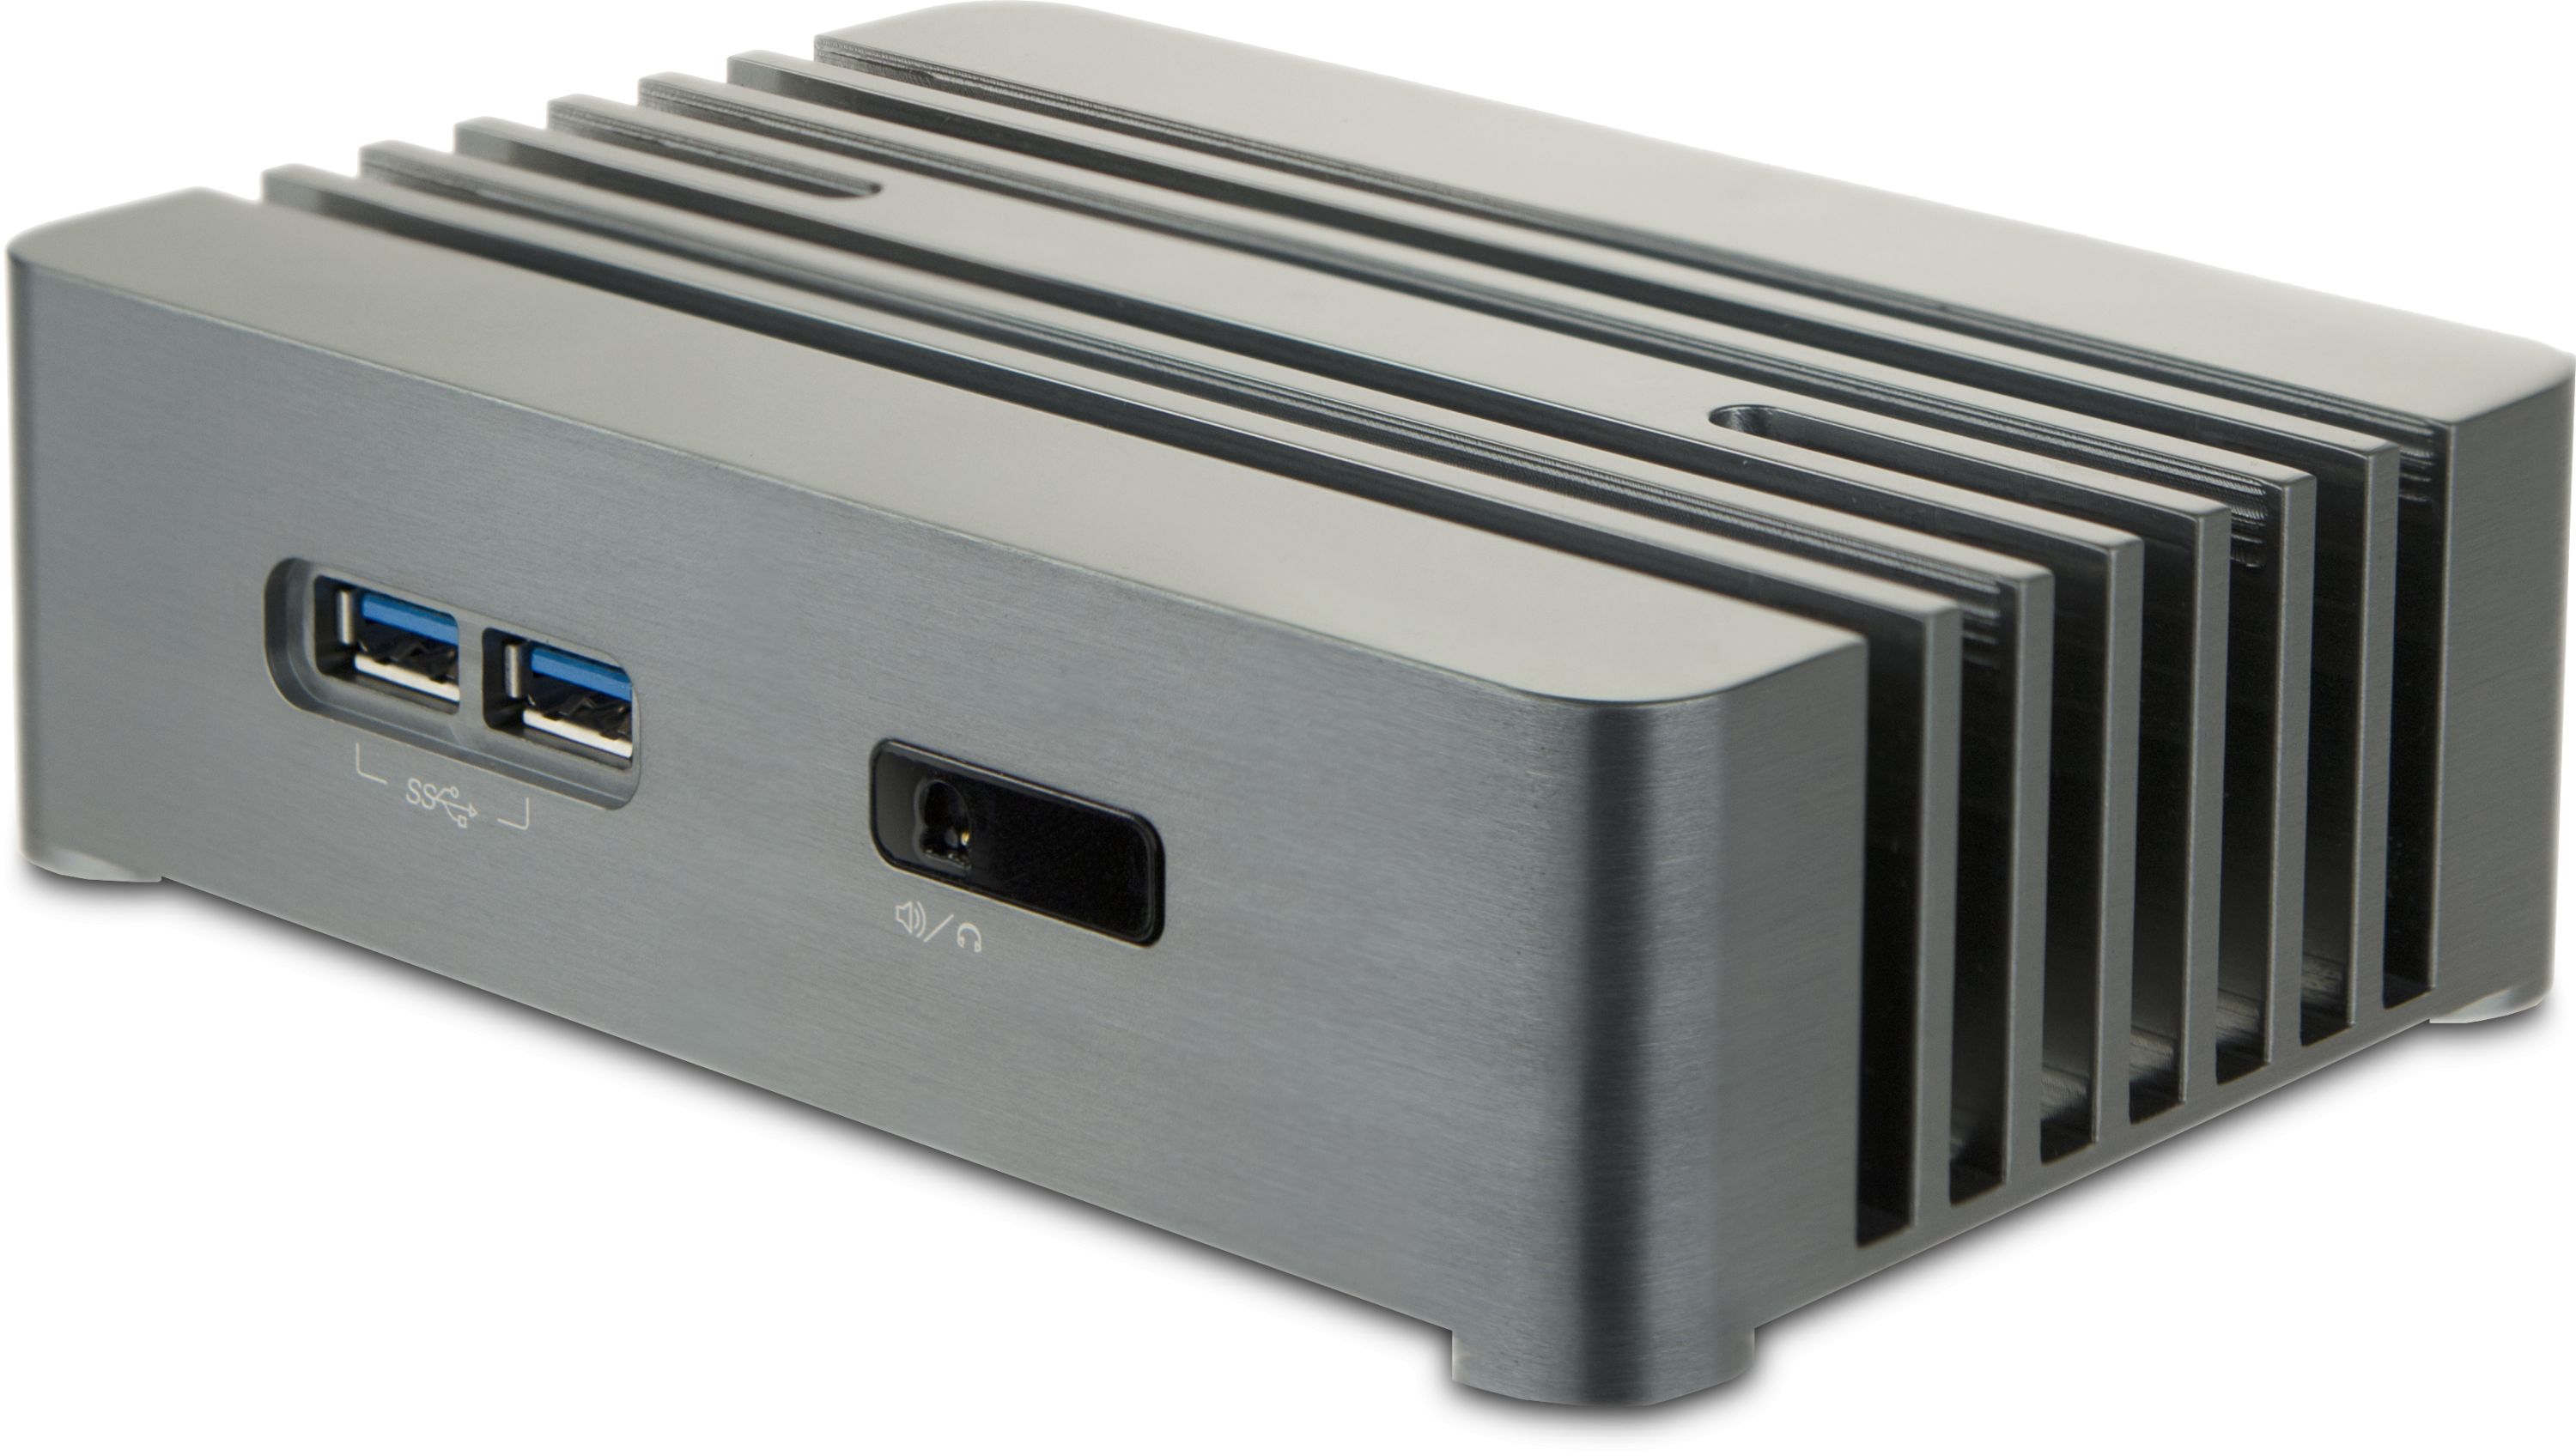 Tranquil PC launches fanless mini PCs with AMD Ryzen chips